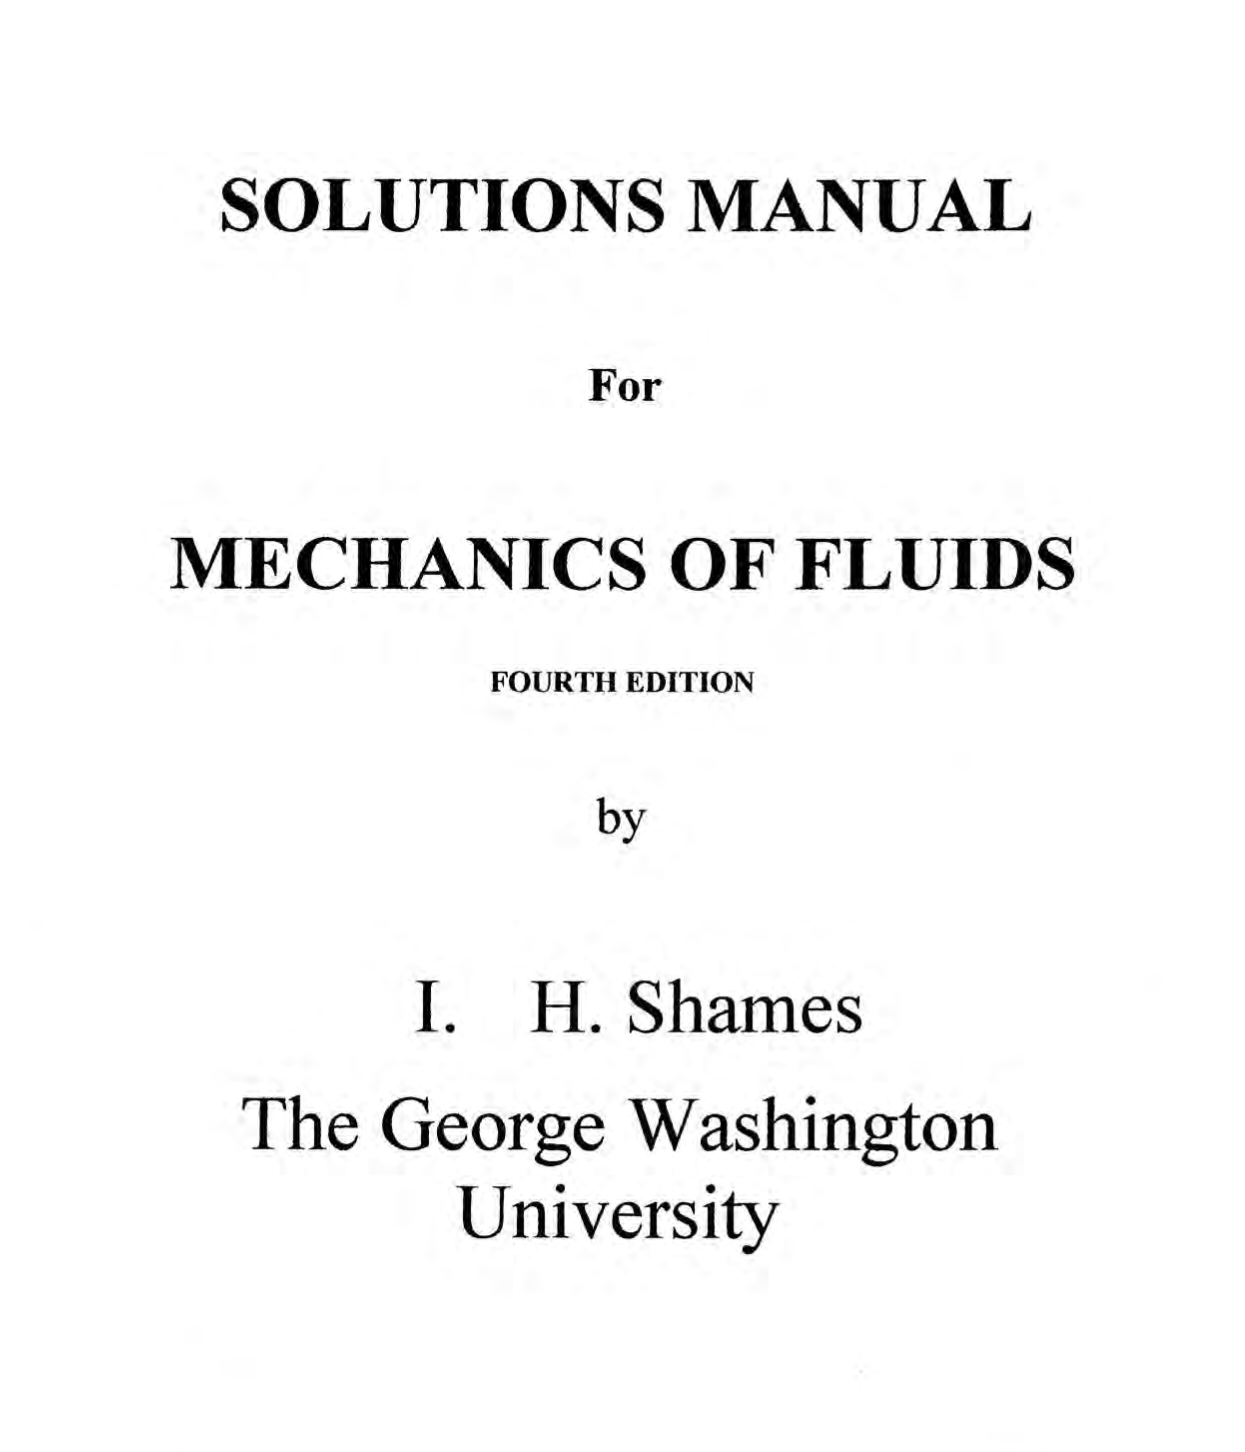 download free solution manual of mechanics of fluids 4th edition written by Irving Shames book in pdf format | gioumeh.com